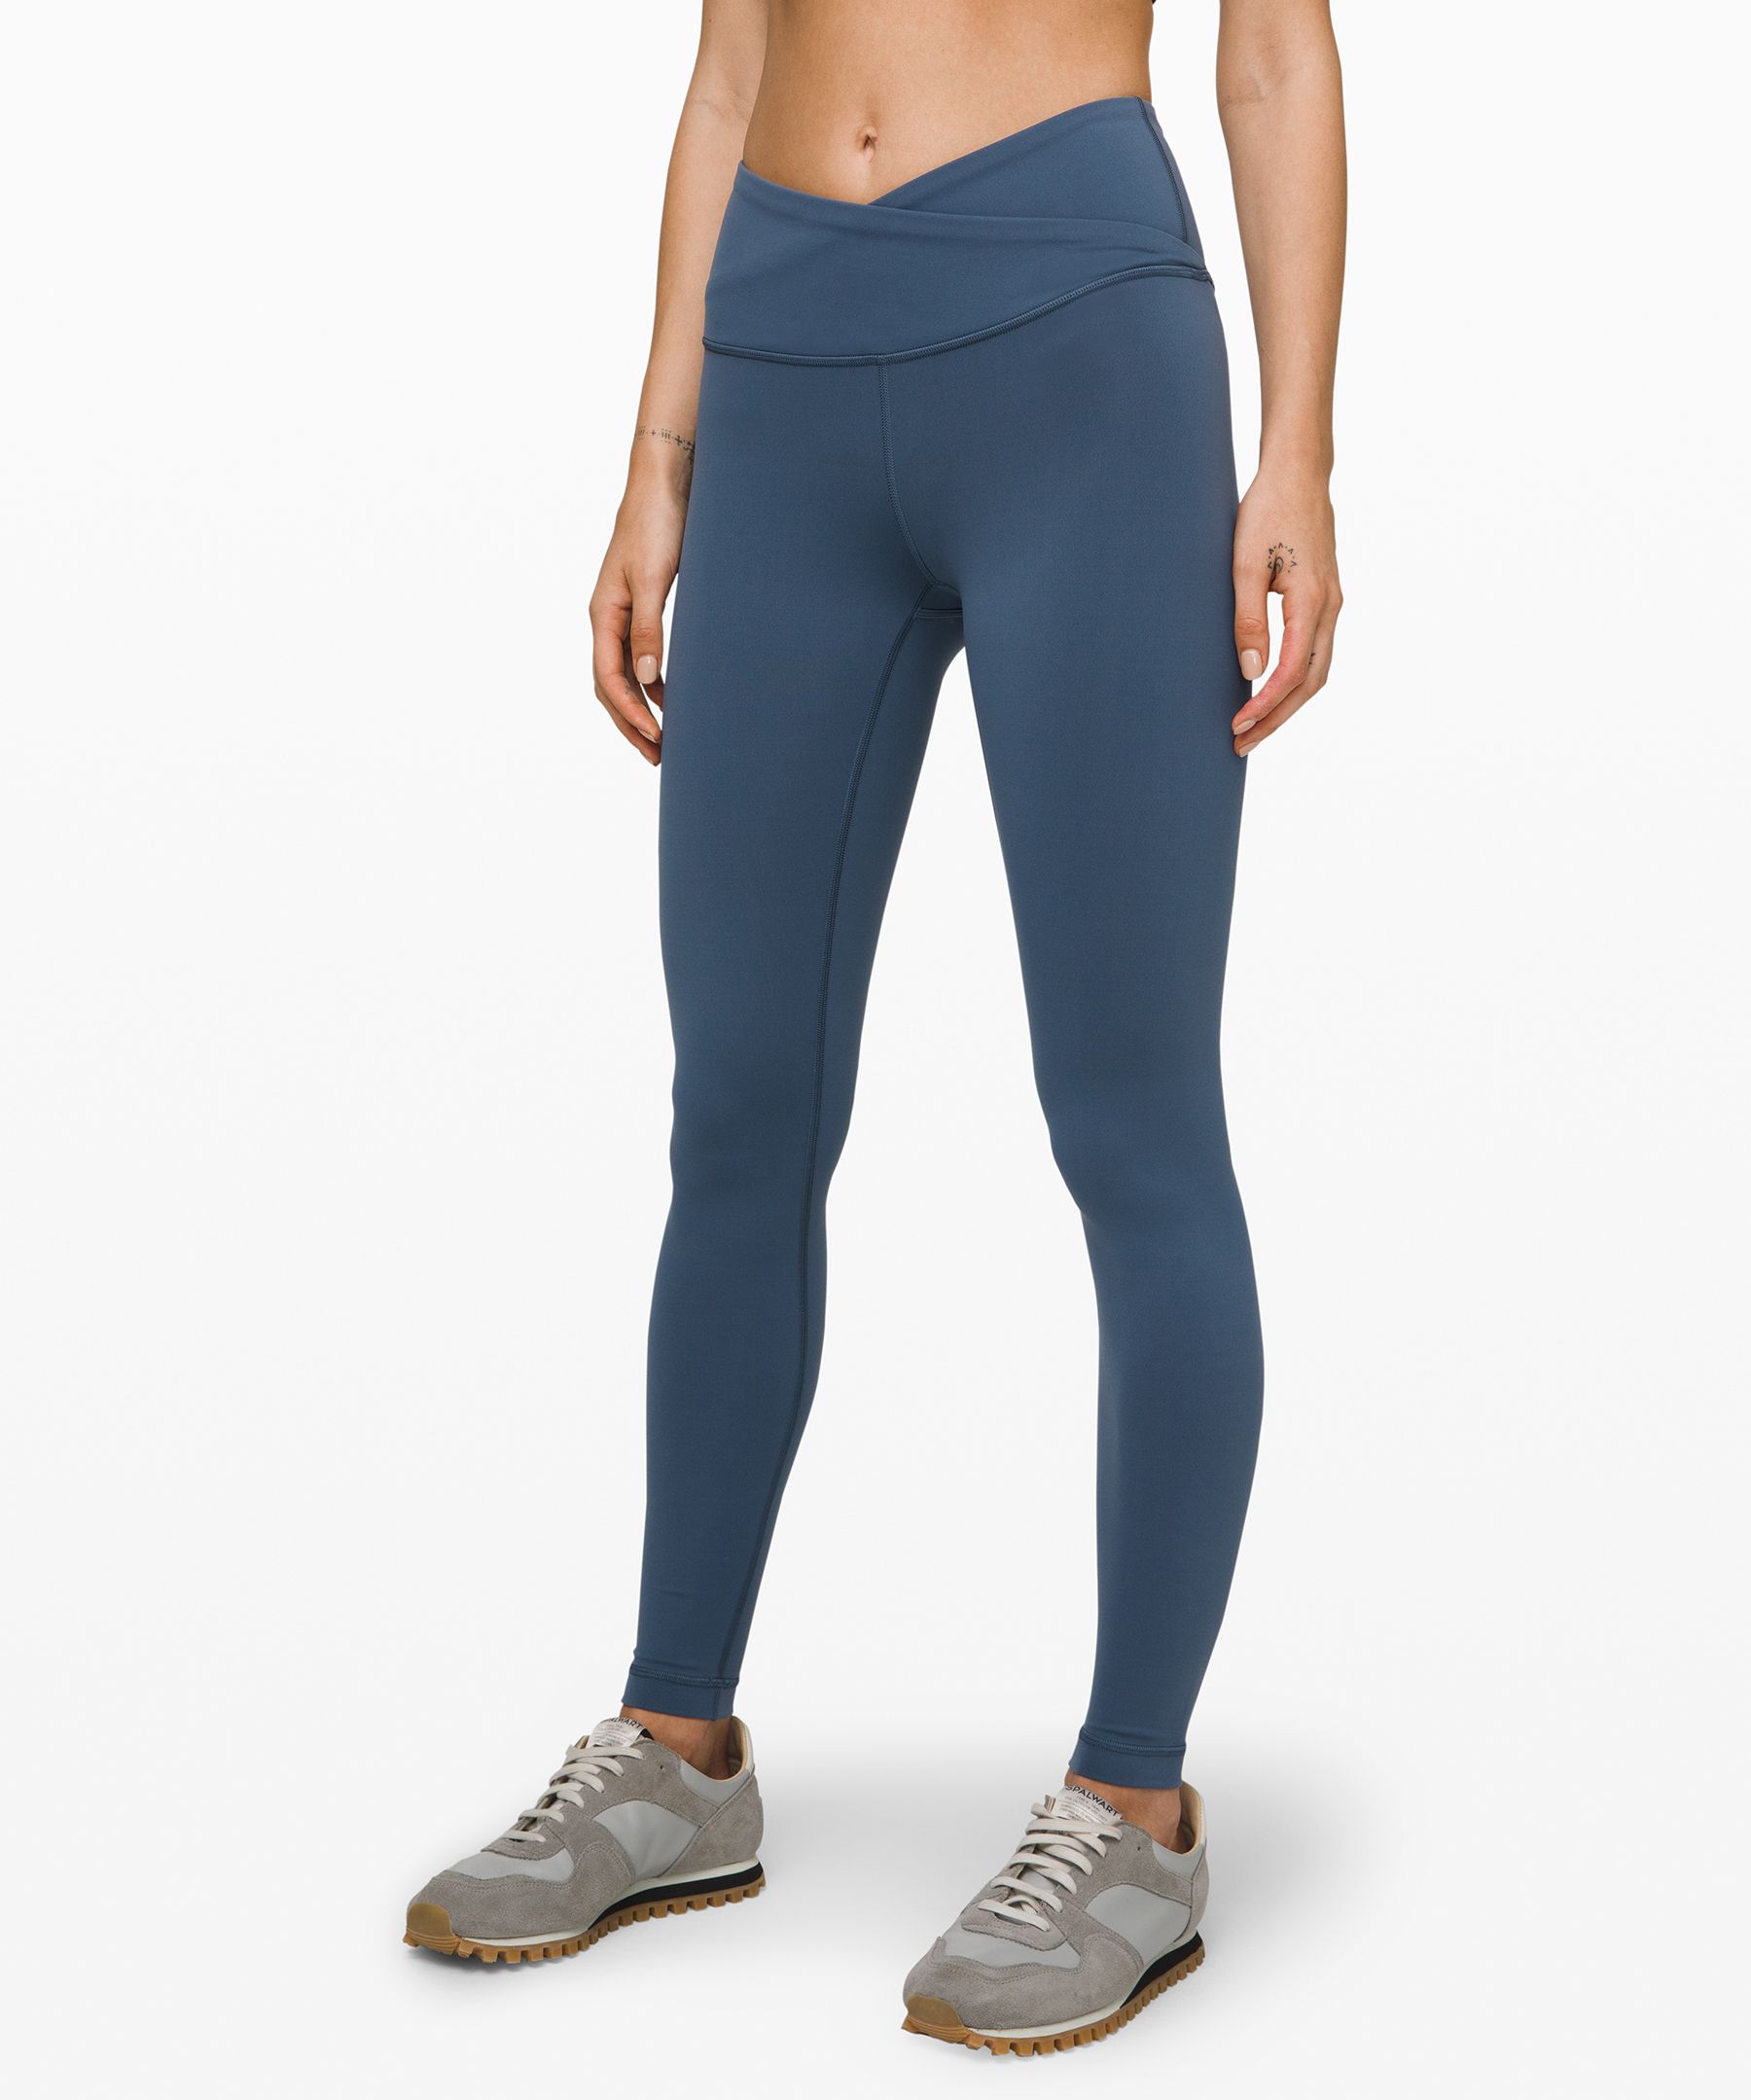 Lululemon Always On High-rise Tight 28" *everlux In Code Blue